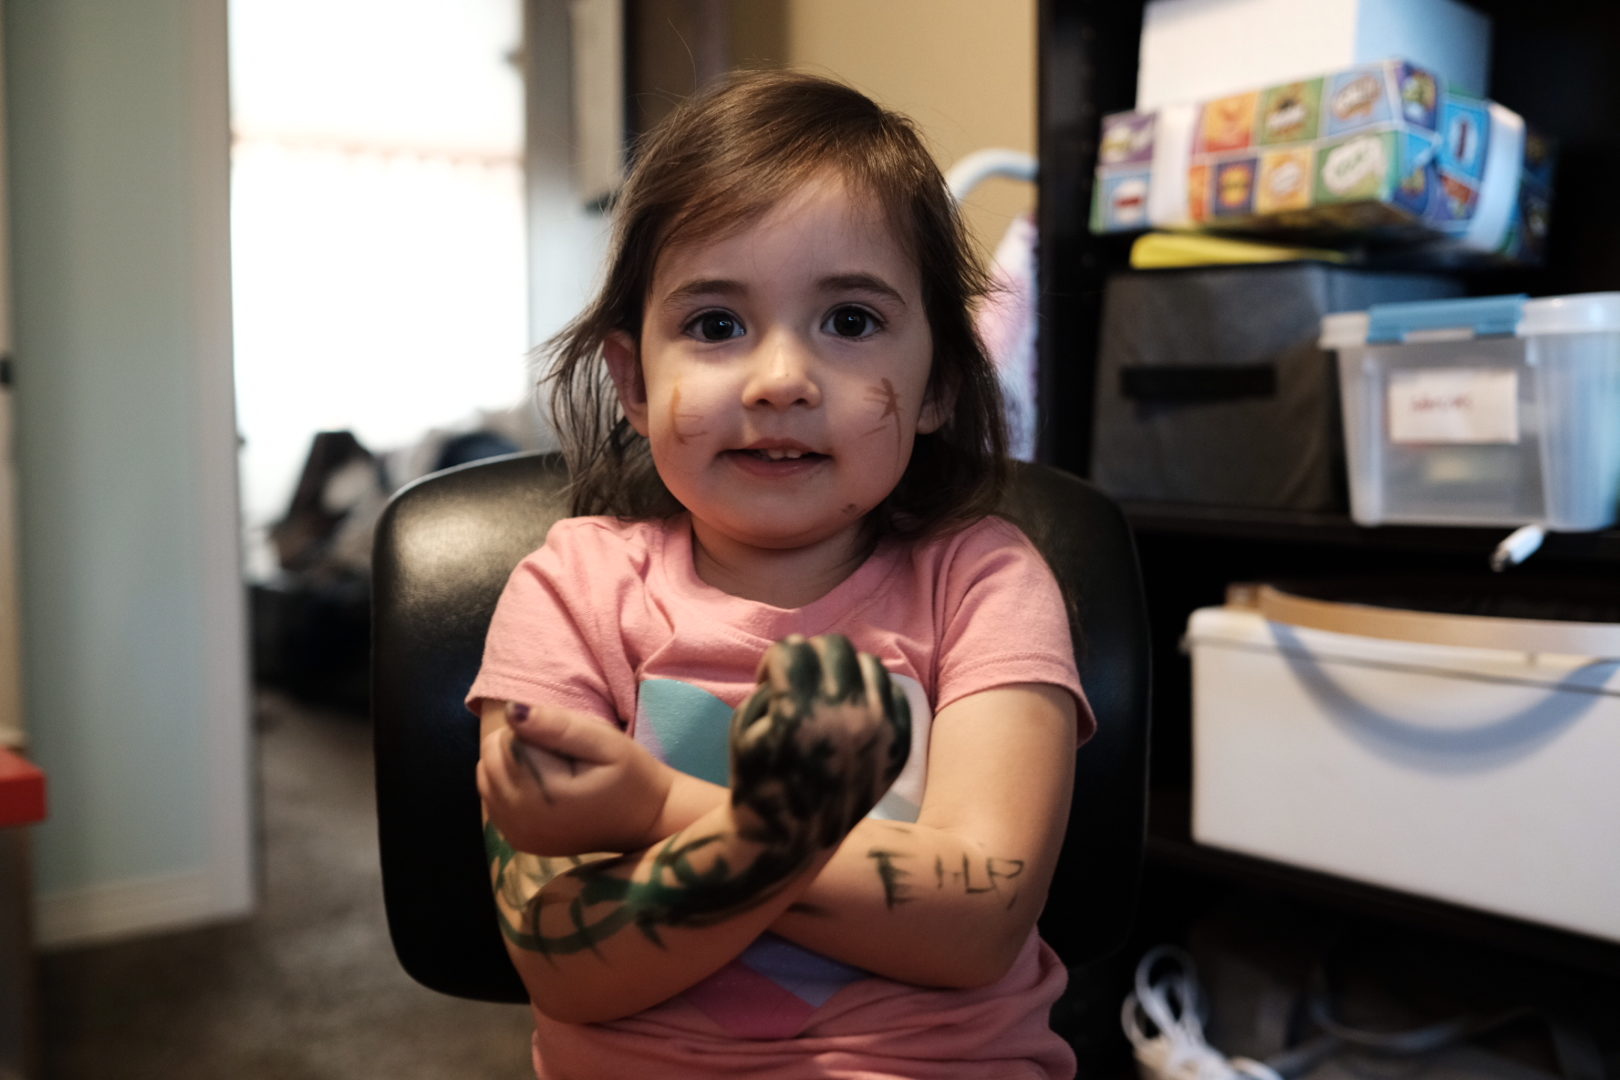 Elle folds her arms that are covered in marker scratches and looks at the camera for me.